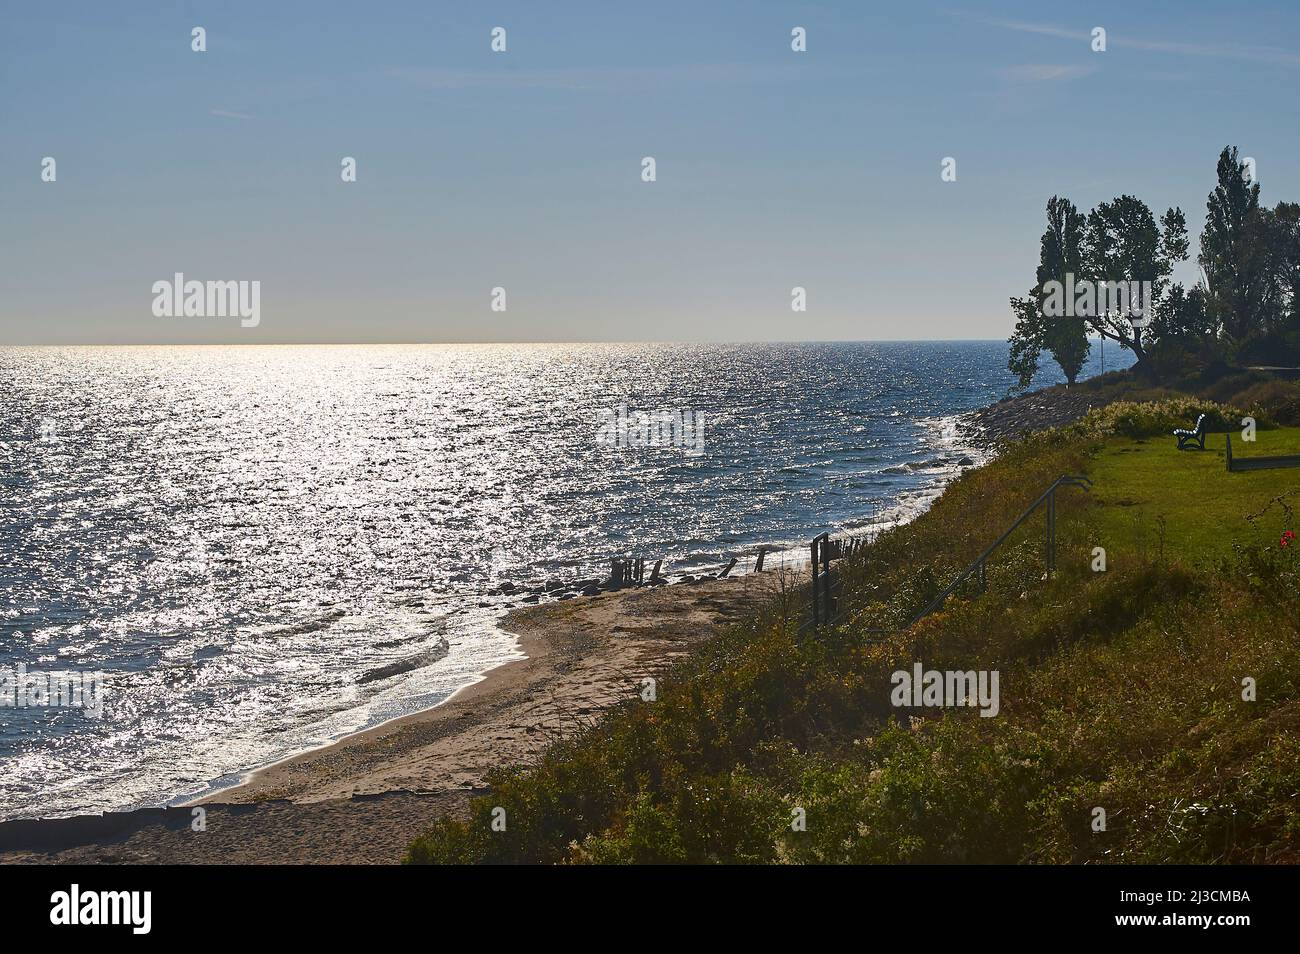 Bay of Luebeck as seen from Dahmeshöved, Northern Germany, Europe Stock Photo